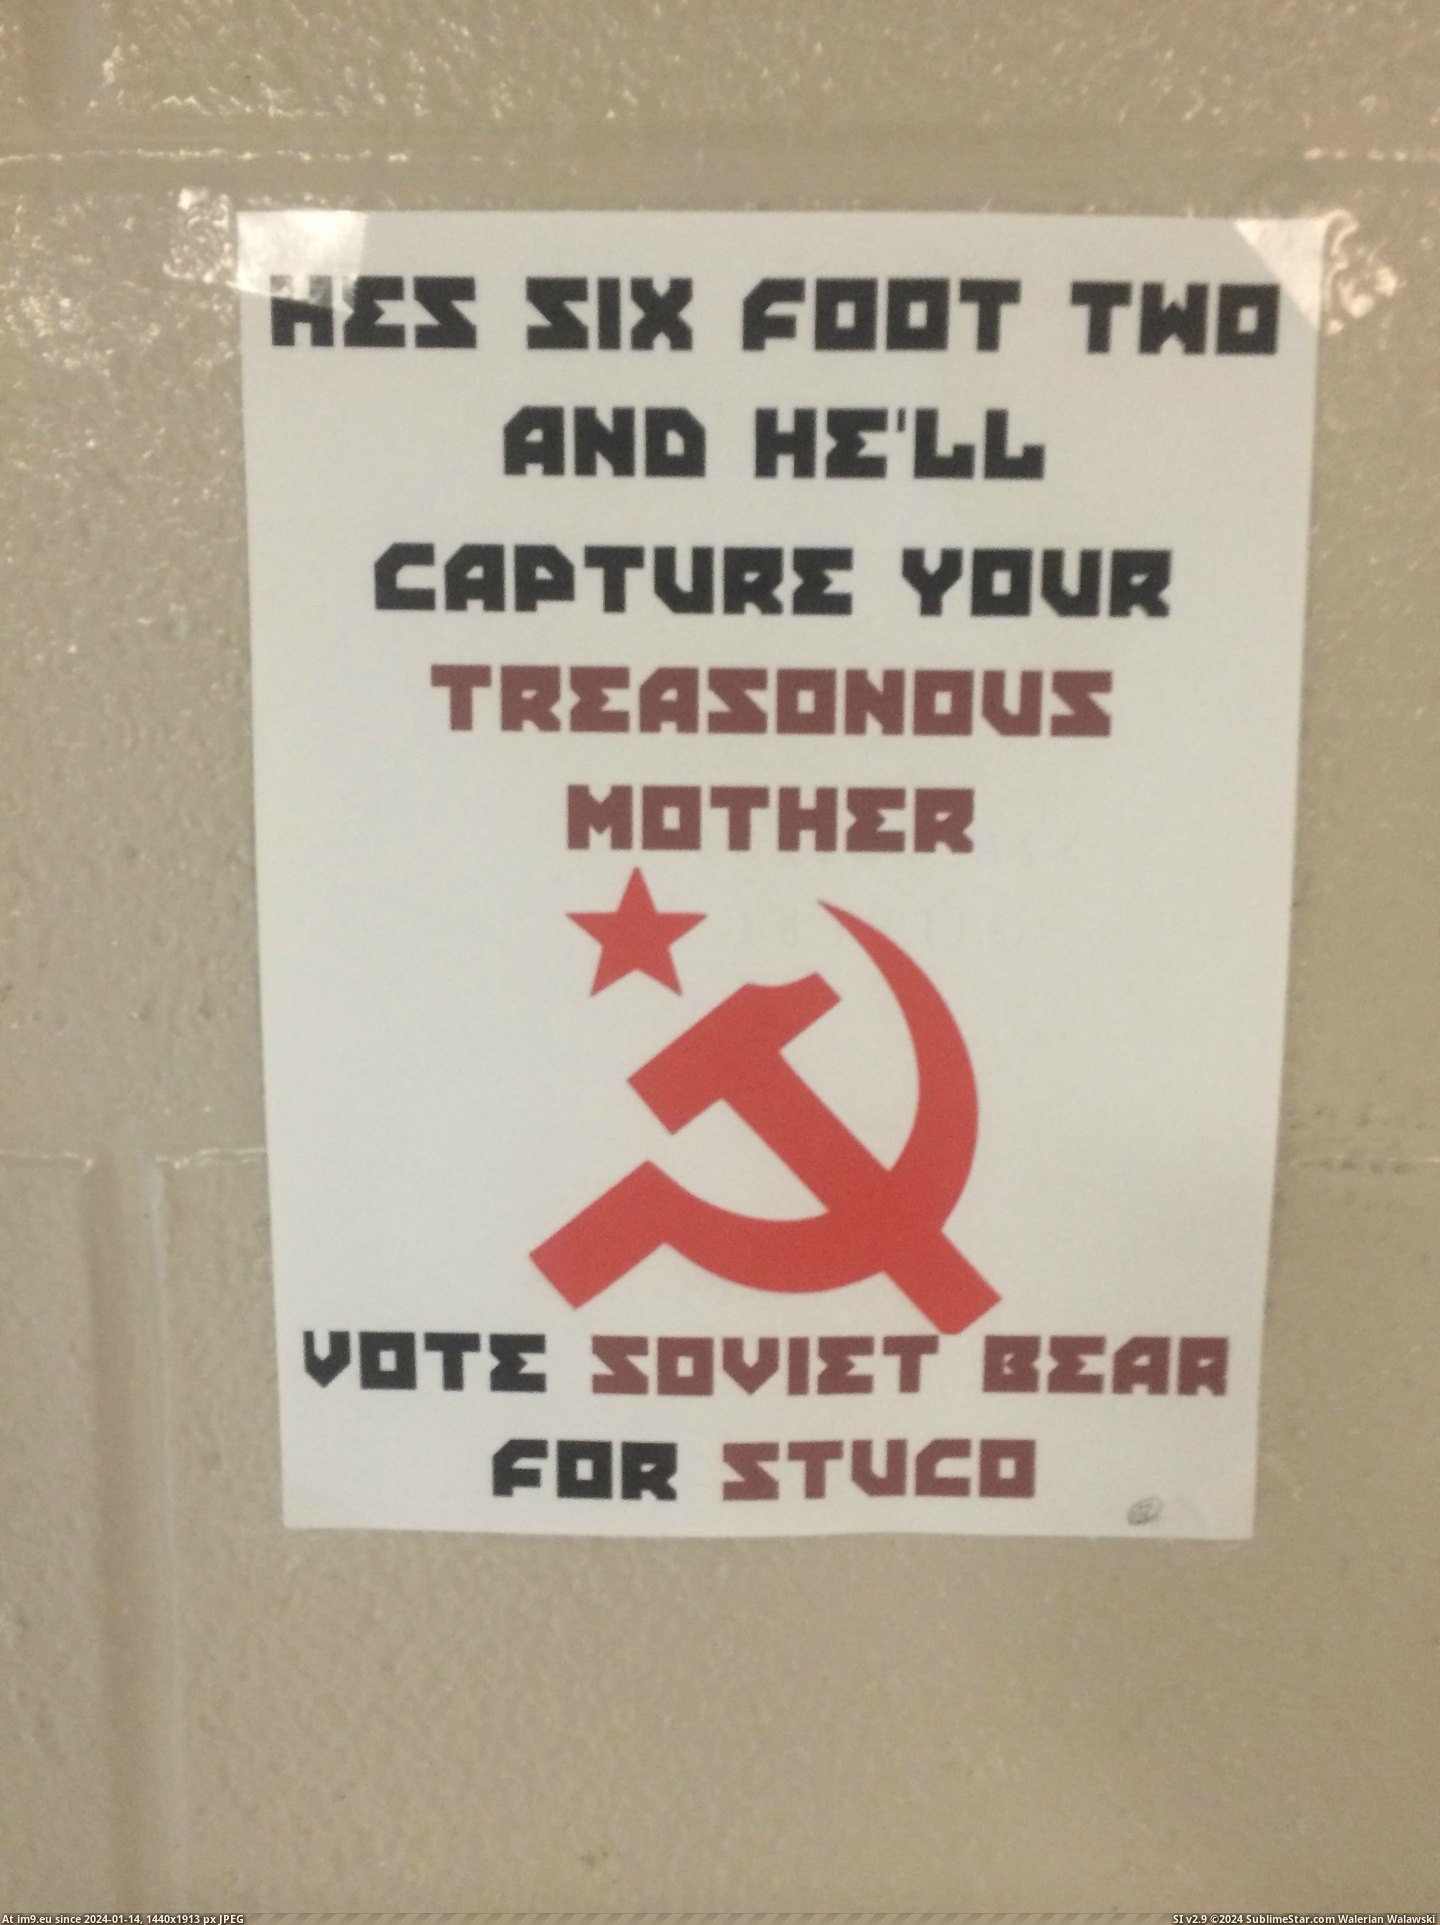 #Funny #School #Decided #Holding #Soviet #Council #Elections #Bear #Student #Run [Funny] So my school is holding elections for student council... and someone has decided to run as Soviet Bear 7 Pic. (Obraz z album My r/FUNNY favs))